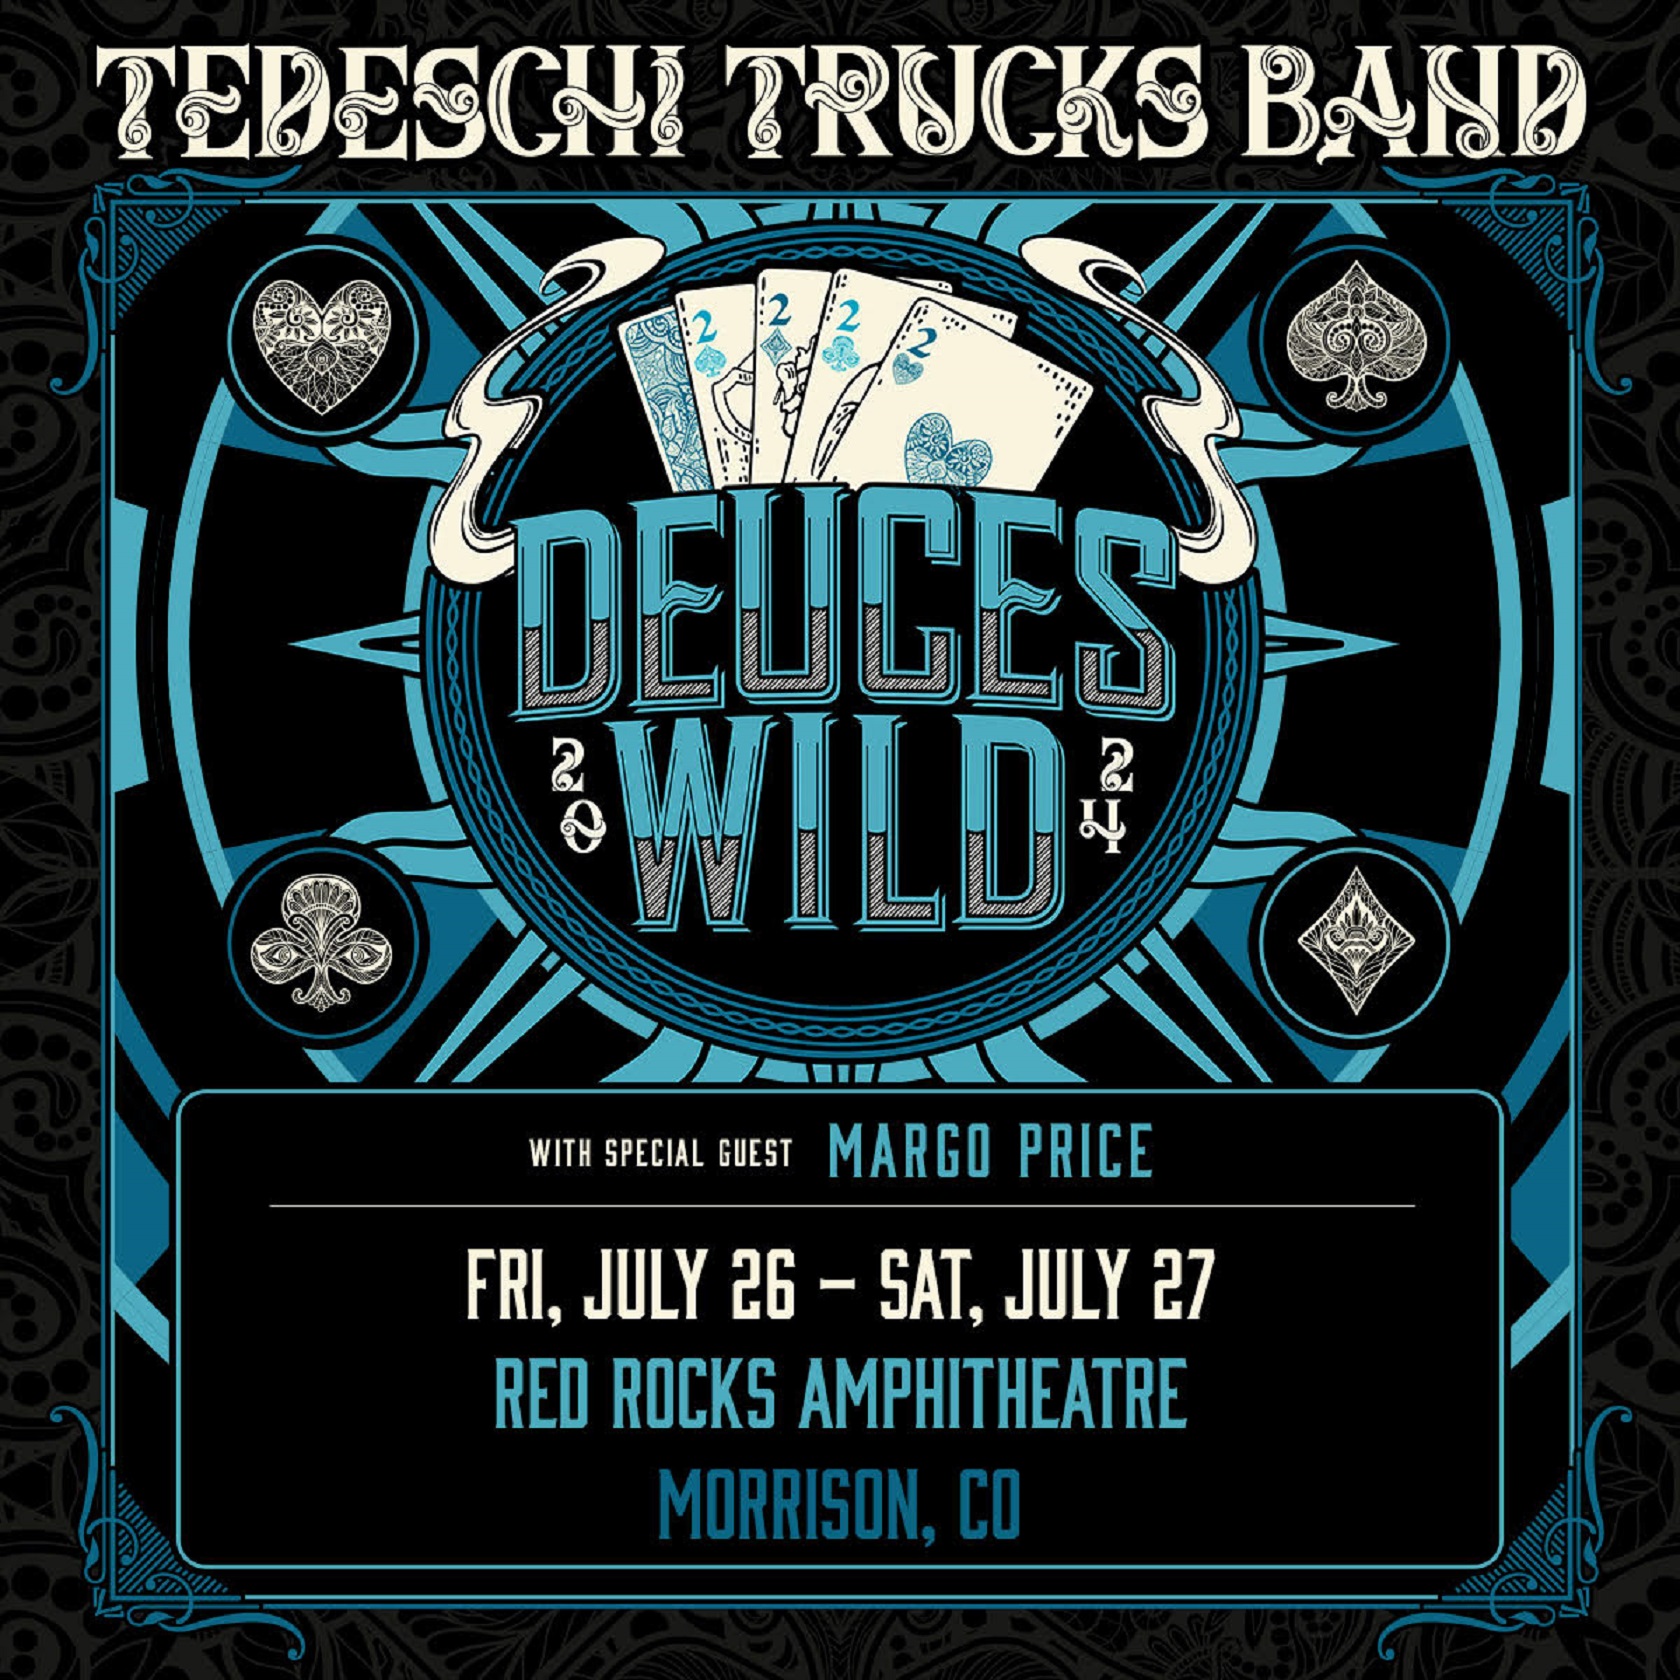 AEG Presents Announces Tedeschi Trucks Band with Margo Price Live at Red Rocks Amphitheatre